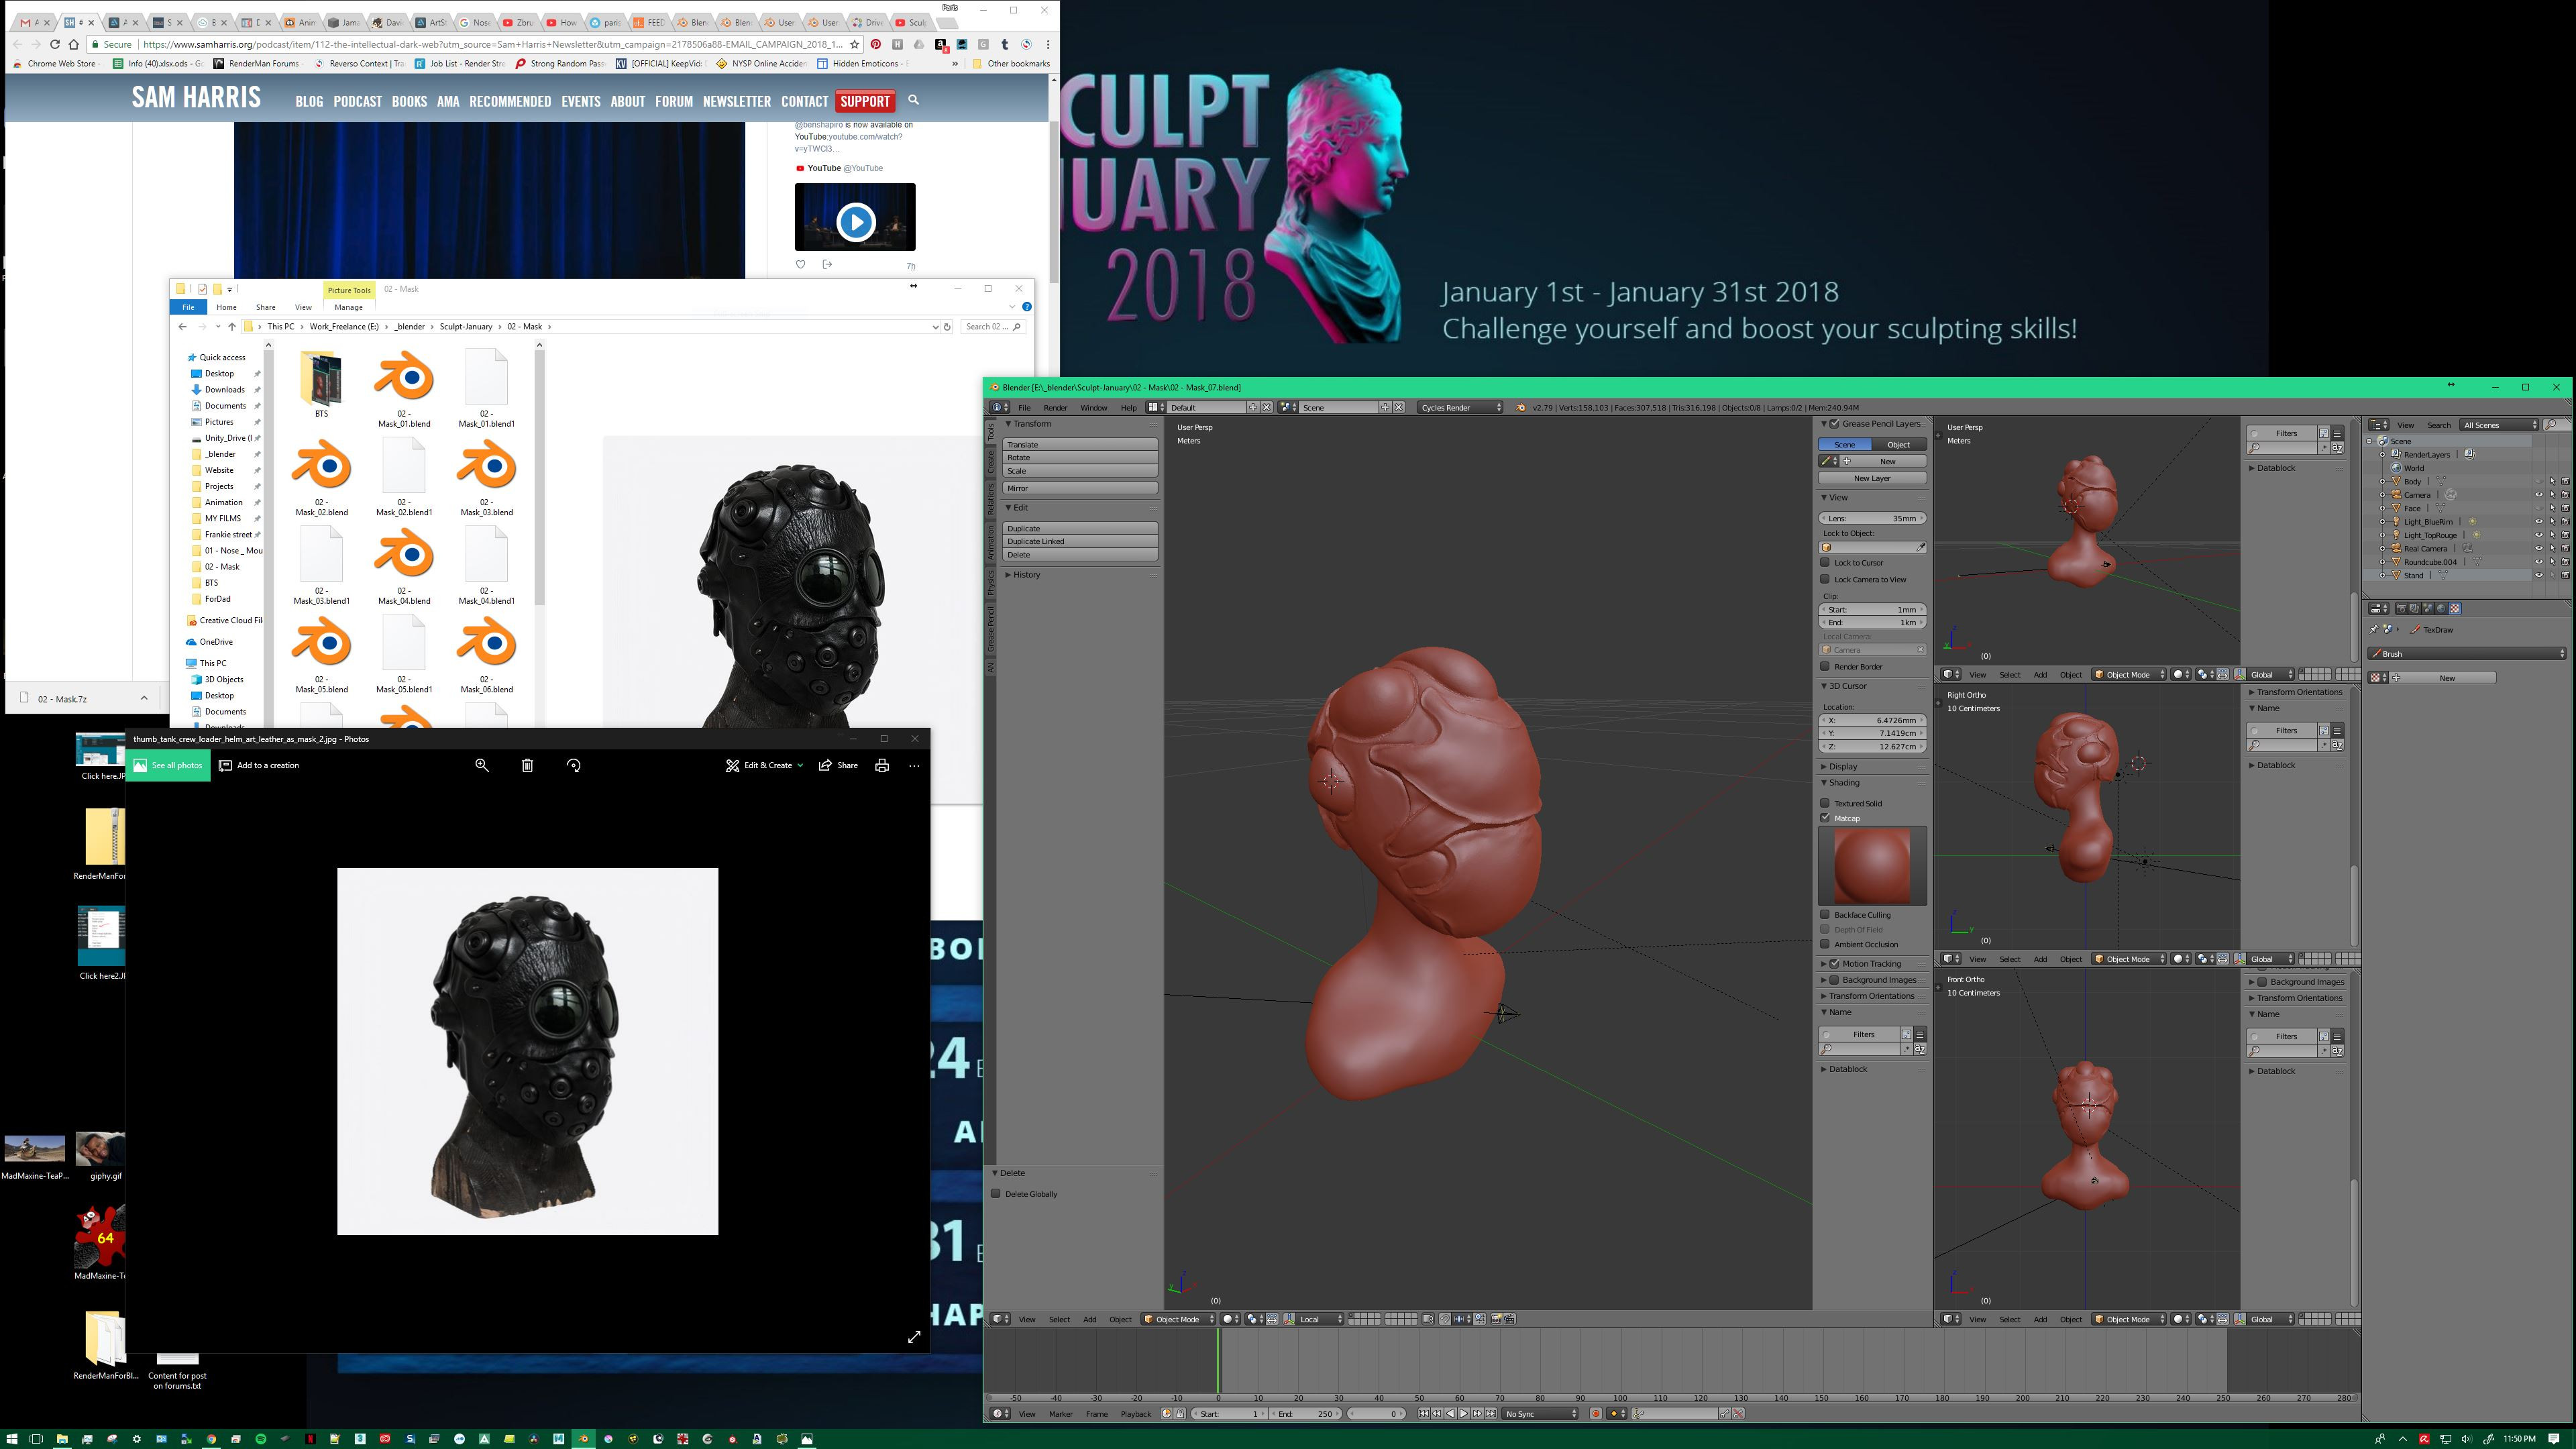 Half way through, I had to hit the reset--as you do when the sculpt is going terrorbully =D